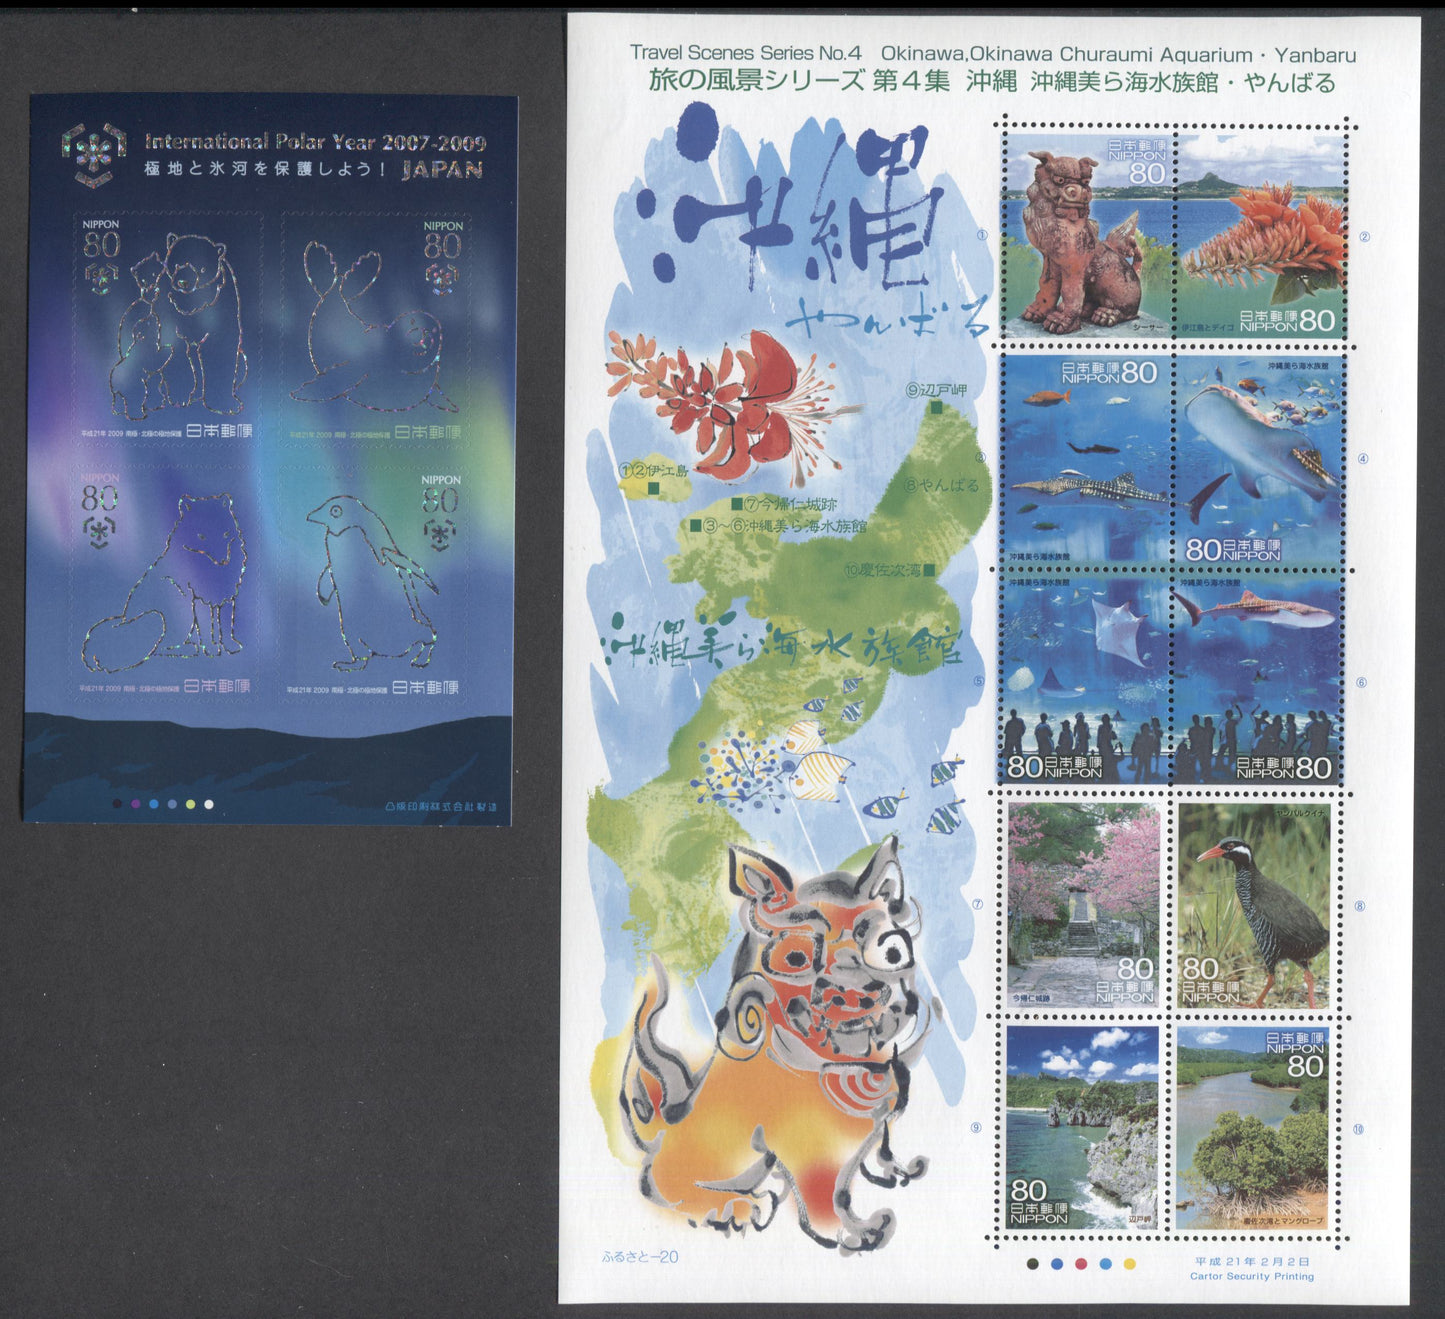 Lot 35 Japan SC#3093/3125 2008-2009 Travel Series #4 - Polar Year Issues, 2 VFNH Souvenir Sheets Of 4 & 10, Click on Listing to See ALL Pictures, 2017 Scott Cat. $23